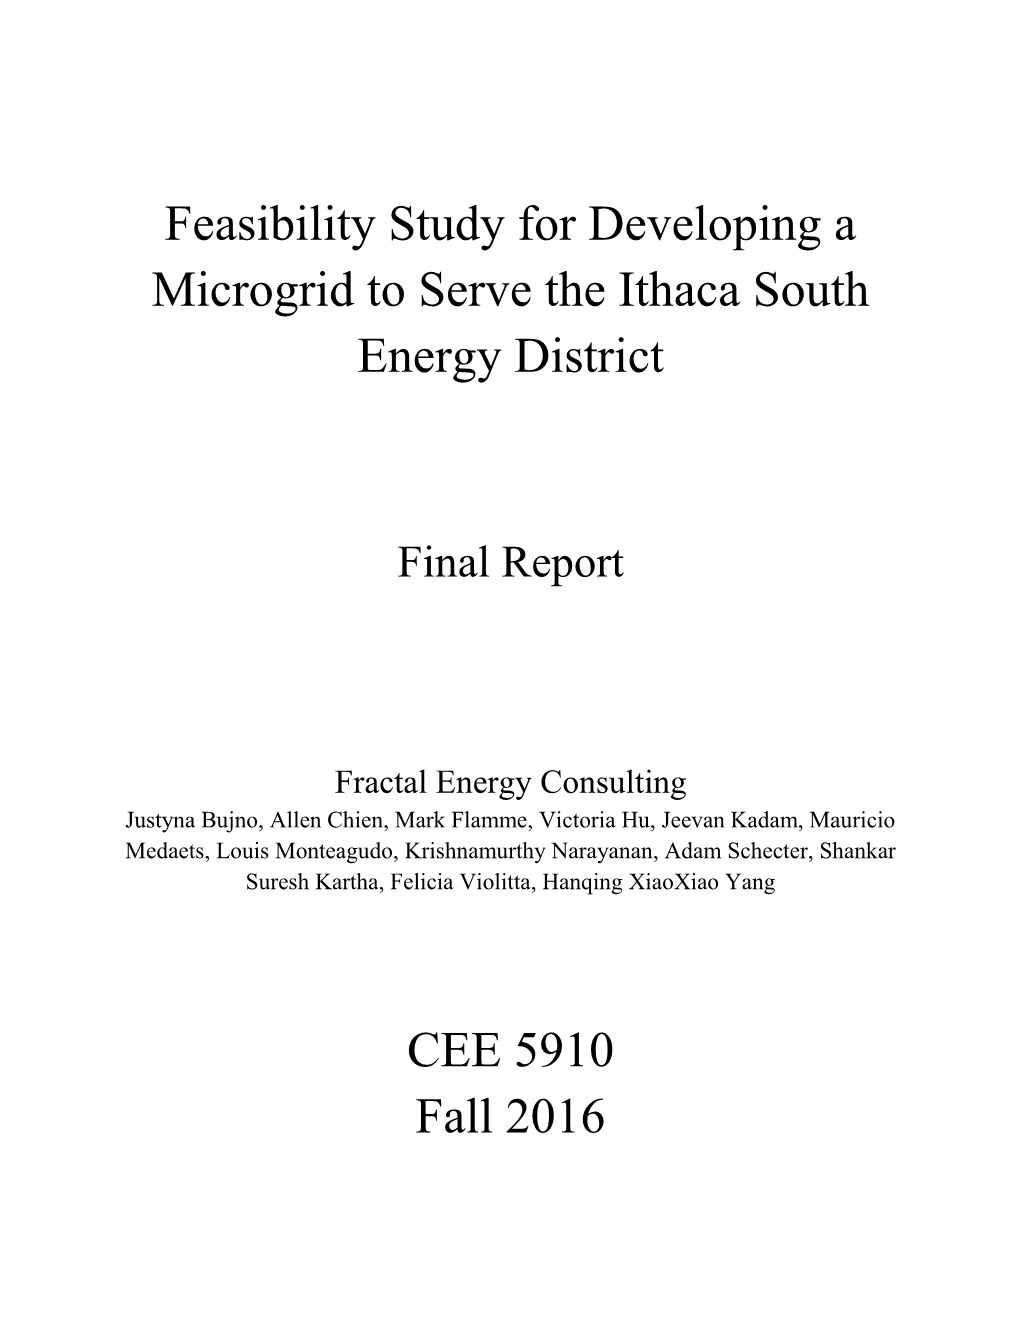 Feasibility Study for Developing a Microgrid to Serve the Ithaca South